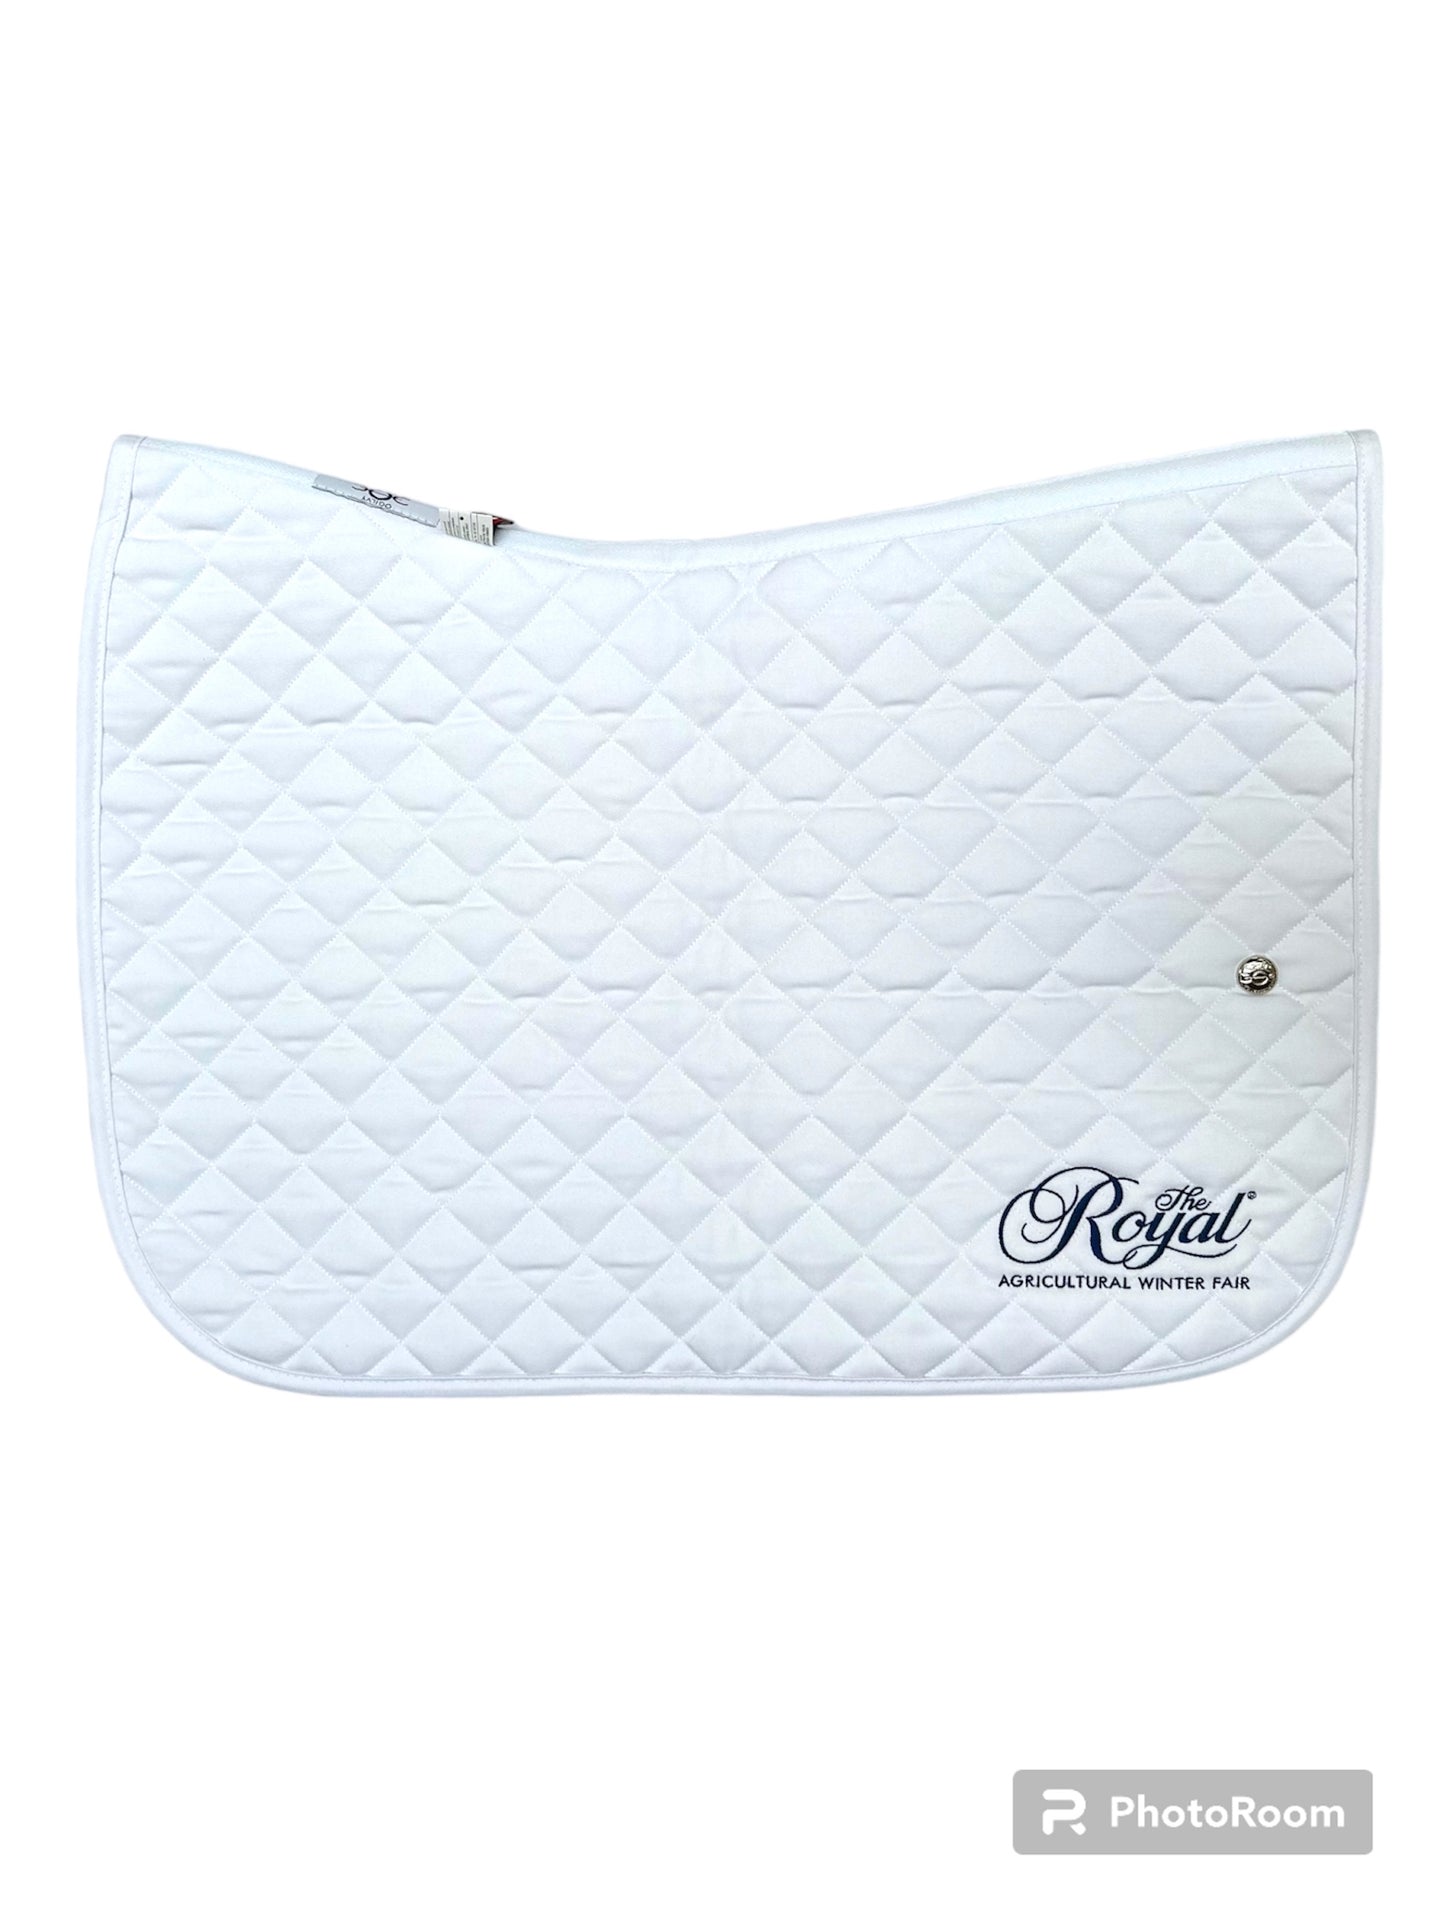 The Royal Baby Pad- Limited Quantity